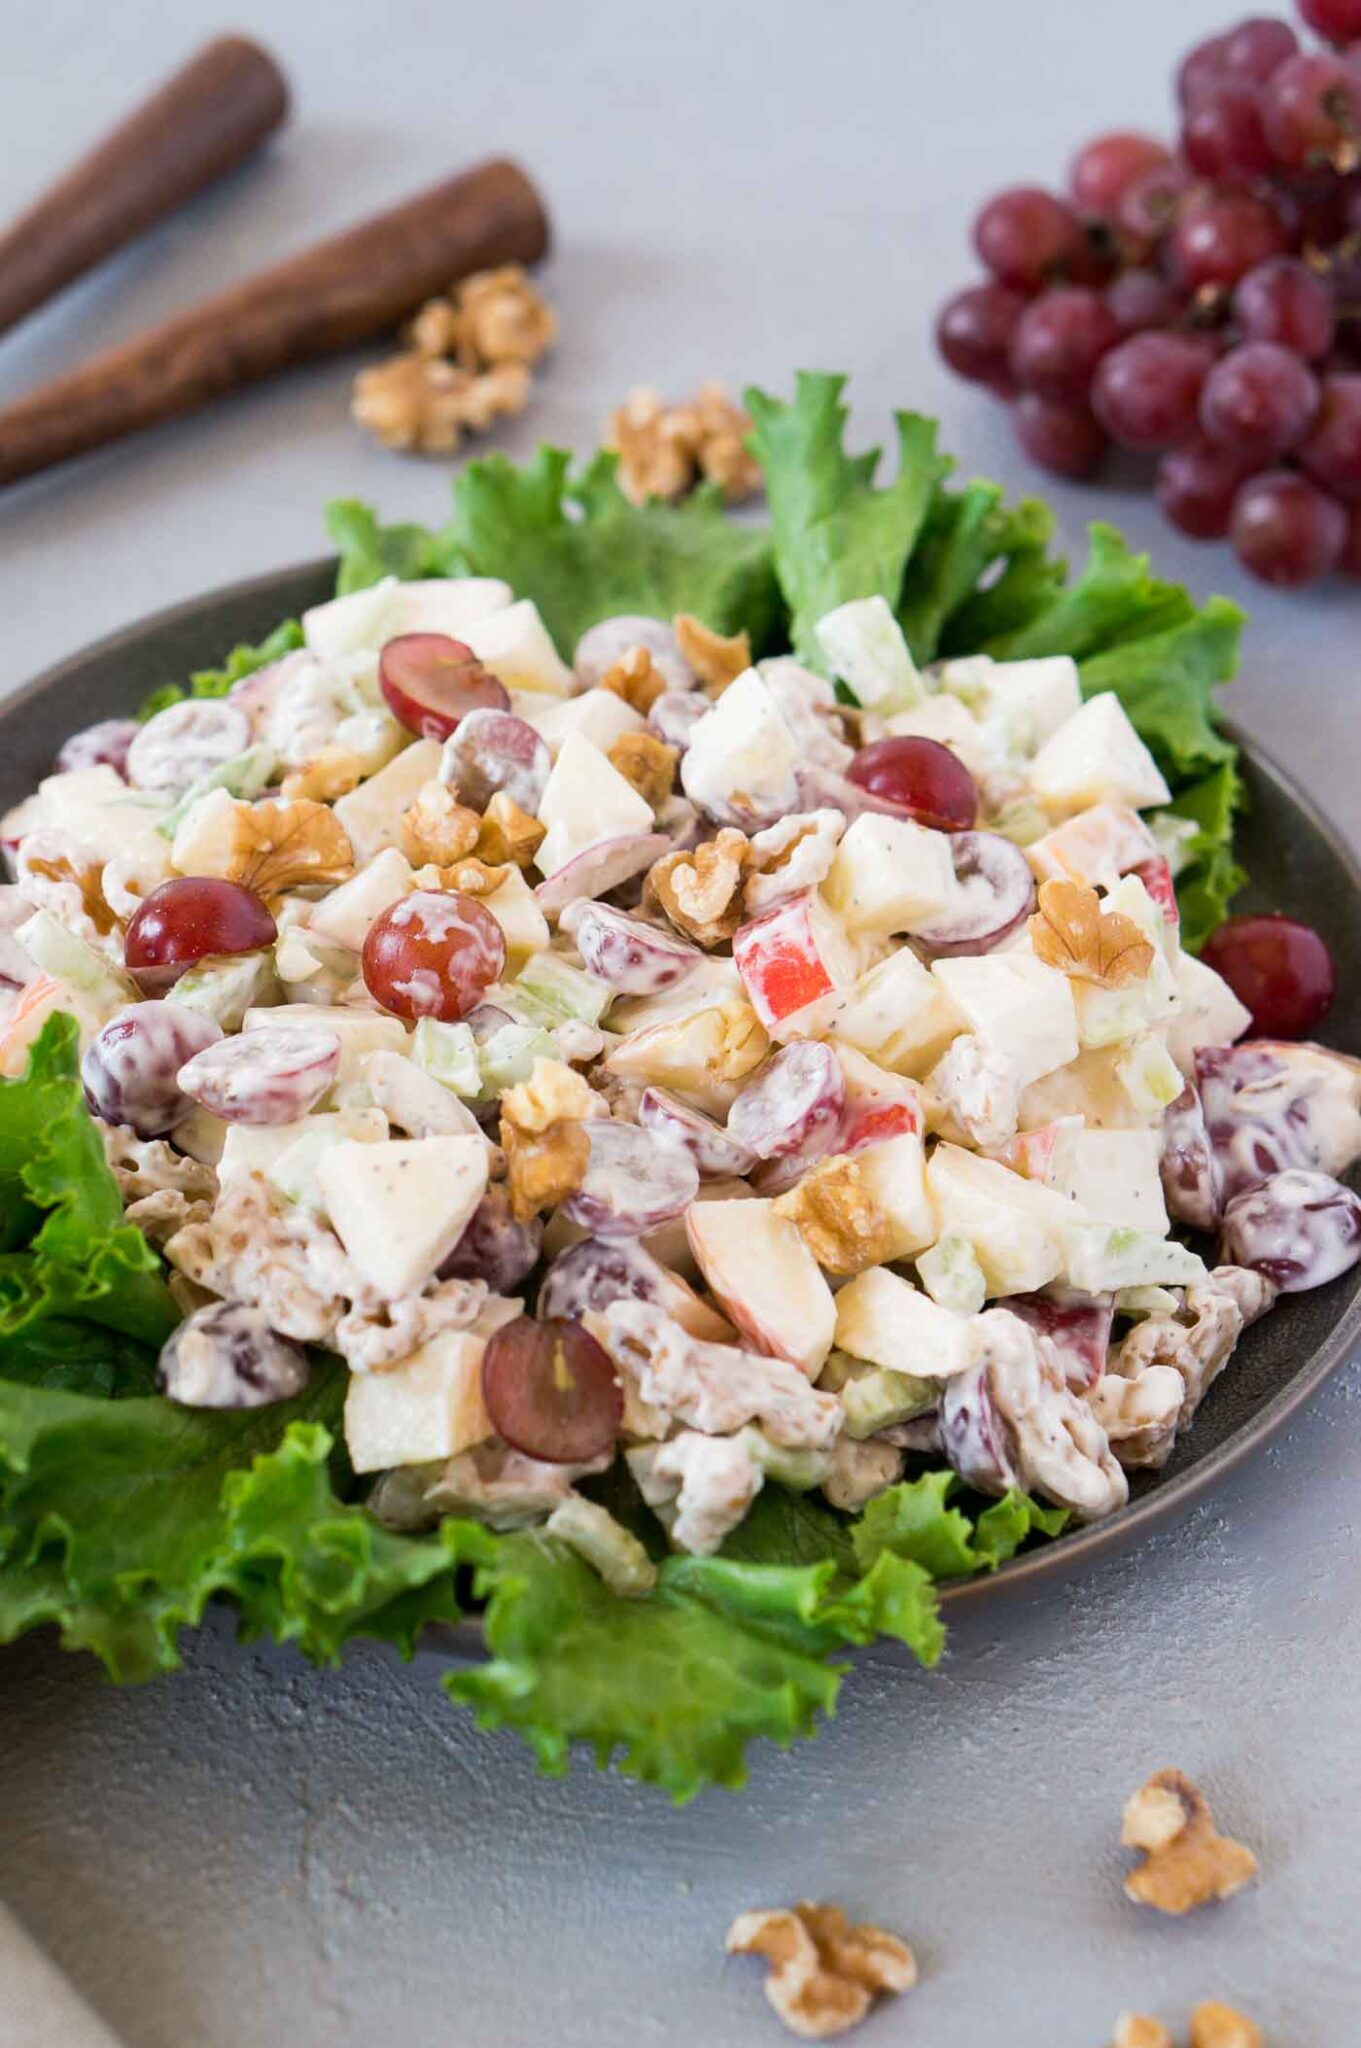 featured image of waldorf salad